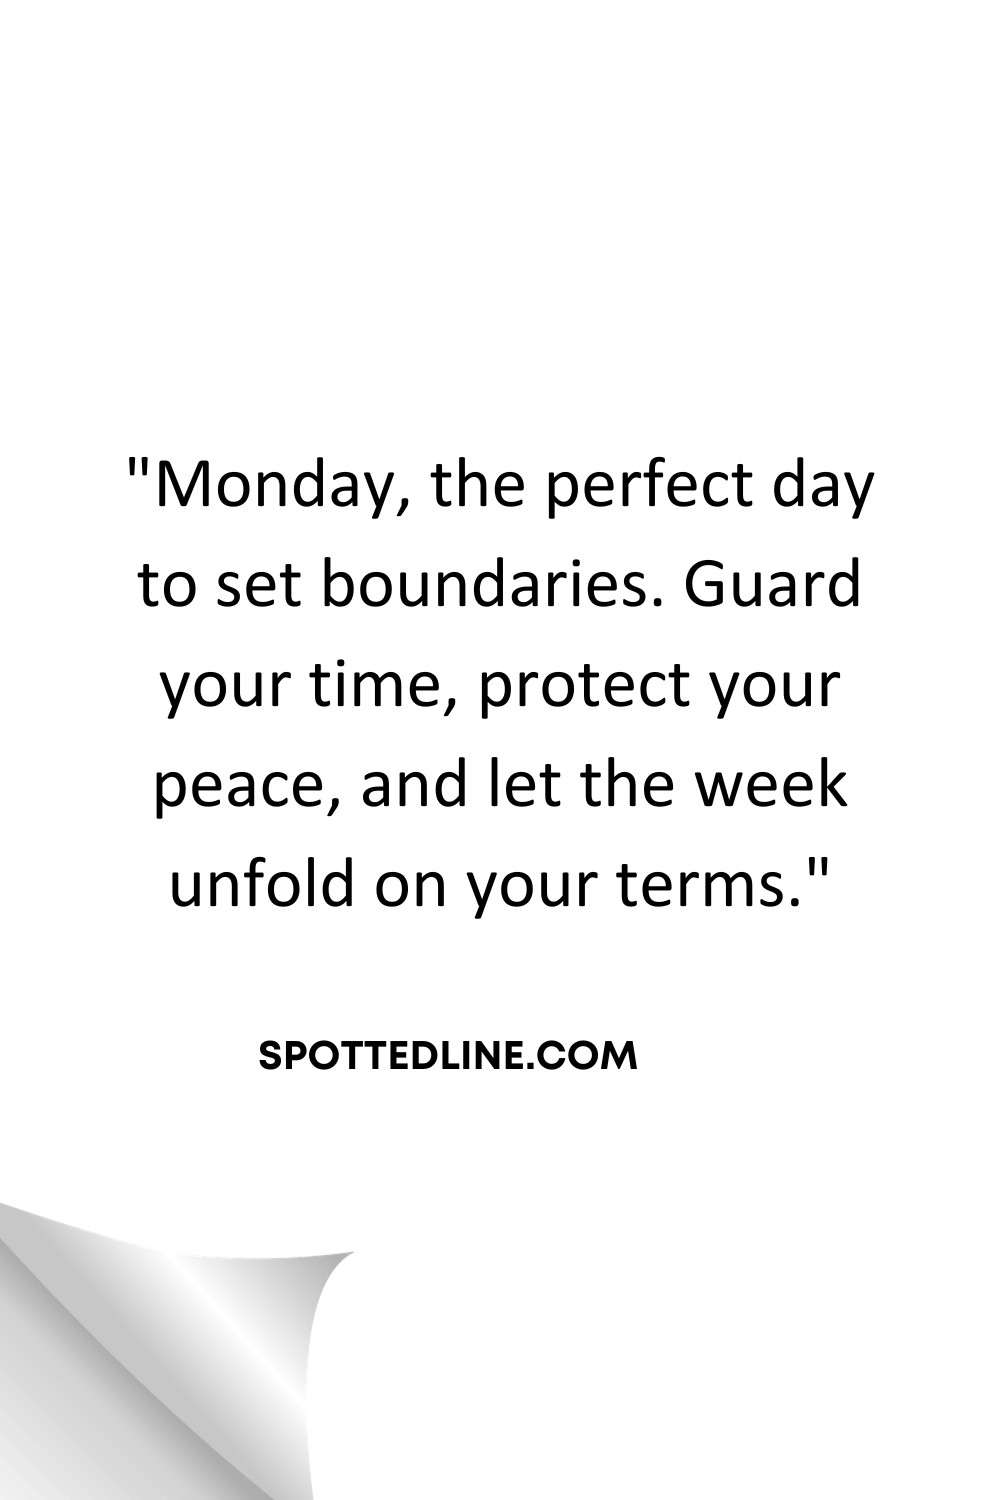 Quotes-on-Mondays-on-Your-Terms